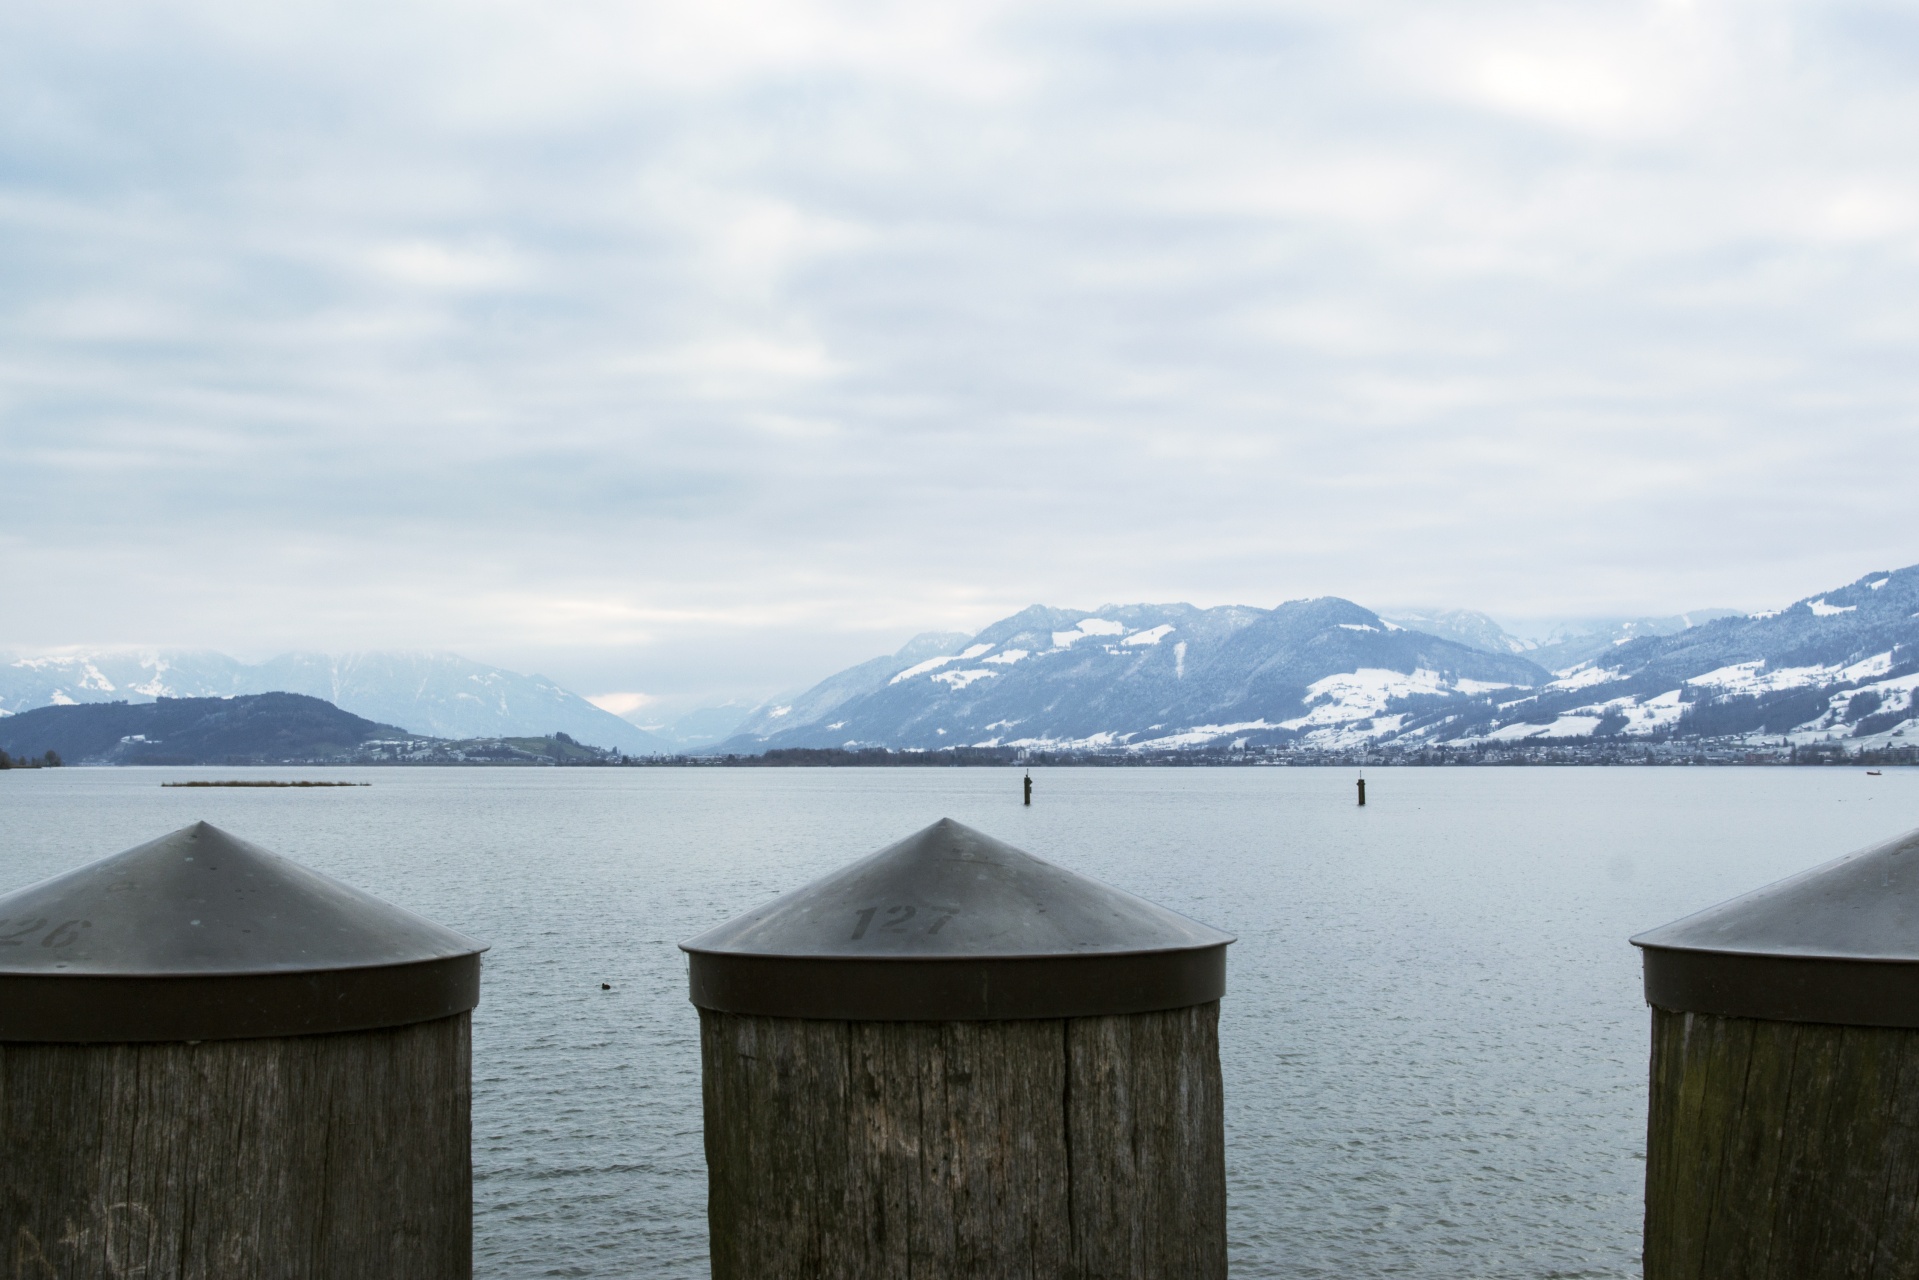 Wintry landscape with lake and mountains in Switzerland